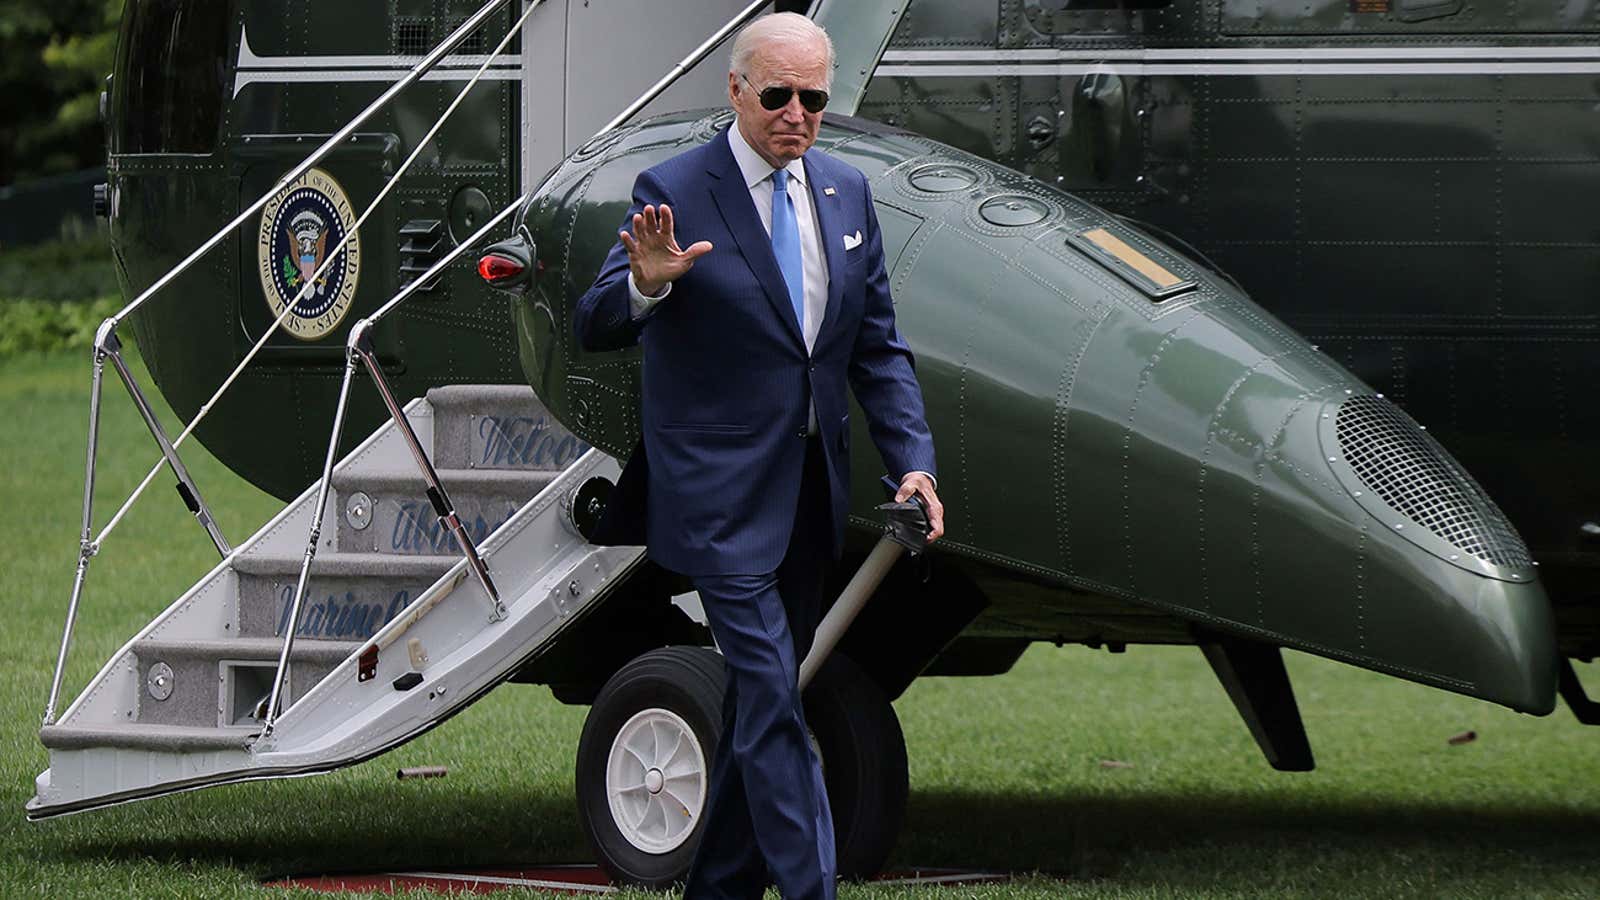 U.S. President Joe Biden arrives at the White House following an interagency briefing on hurricane preparedness at Joint Base Andrews, in Washington, U.S., May 18, 2022. REUTERS/Evelyn Hockstein